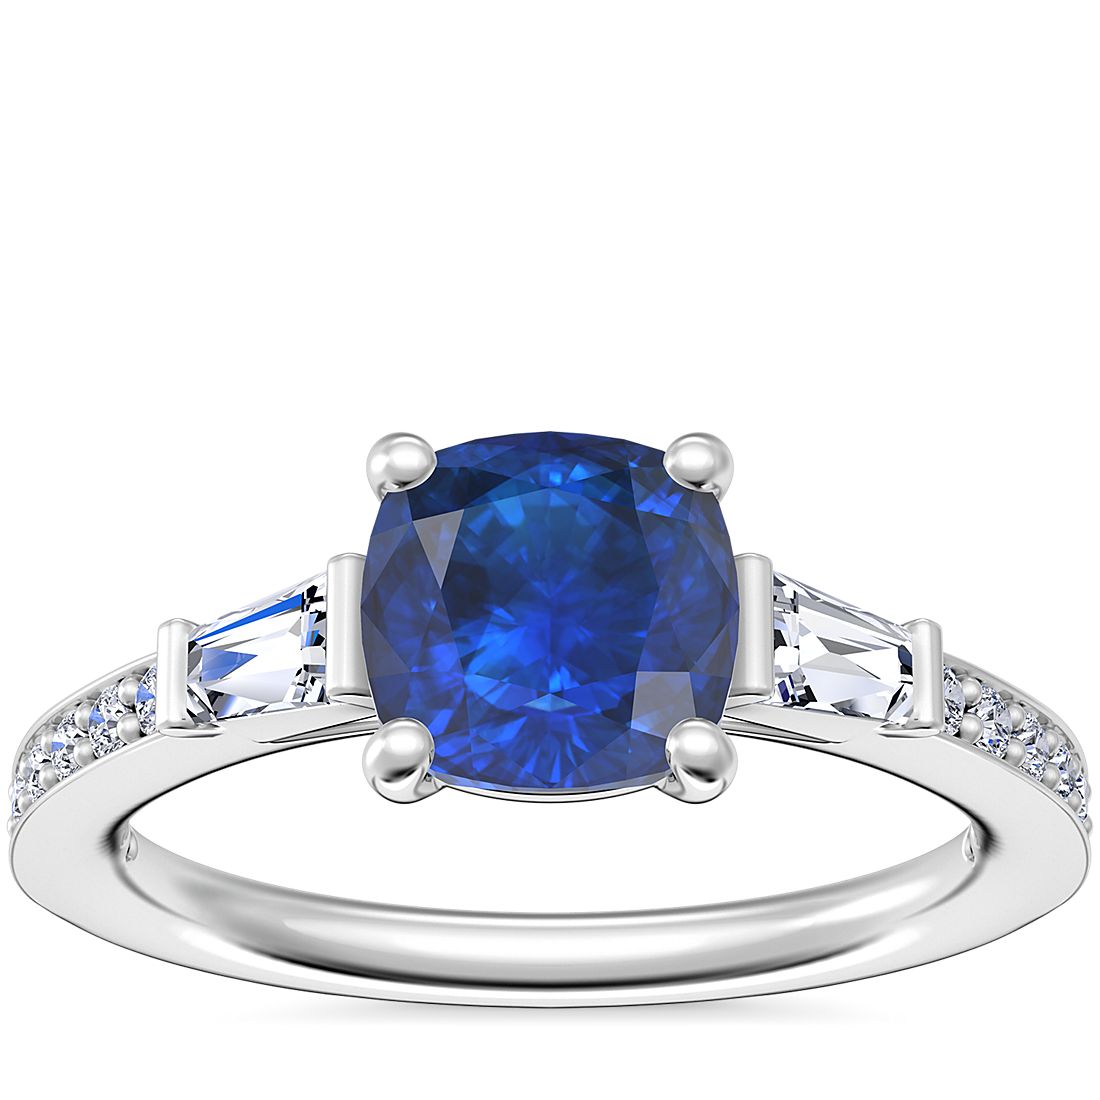 Tapered Baguette Diamond Cathedral Engagement Ring with Cushion Sapphire in Platinum (6mm)